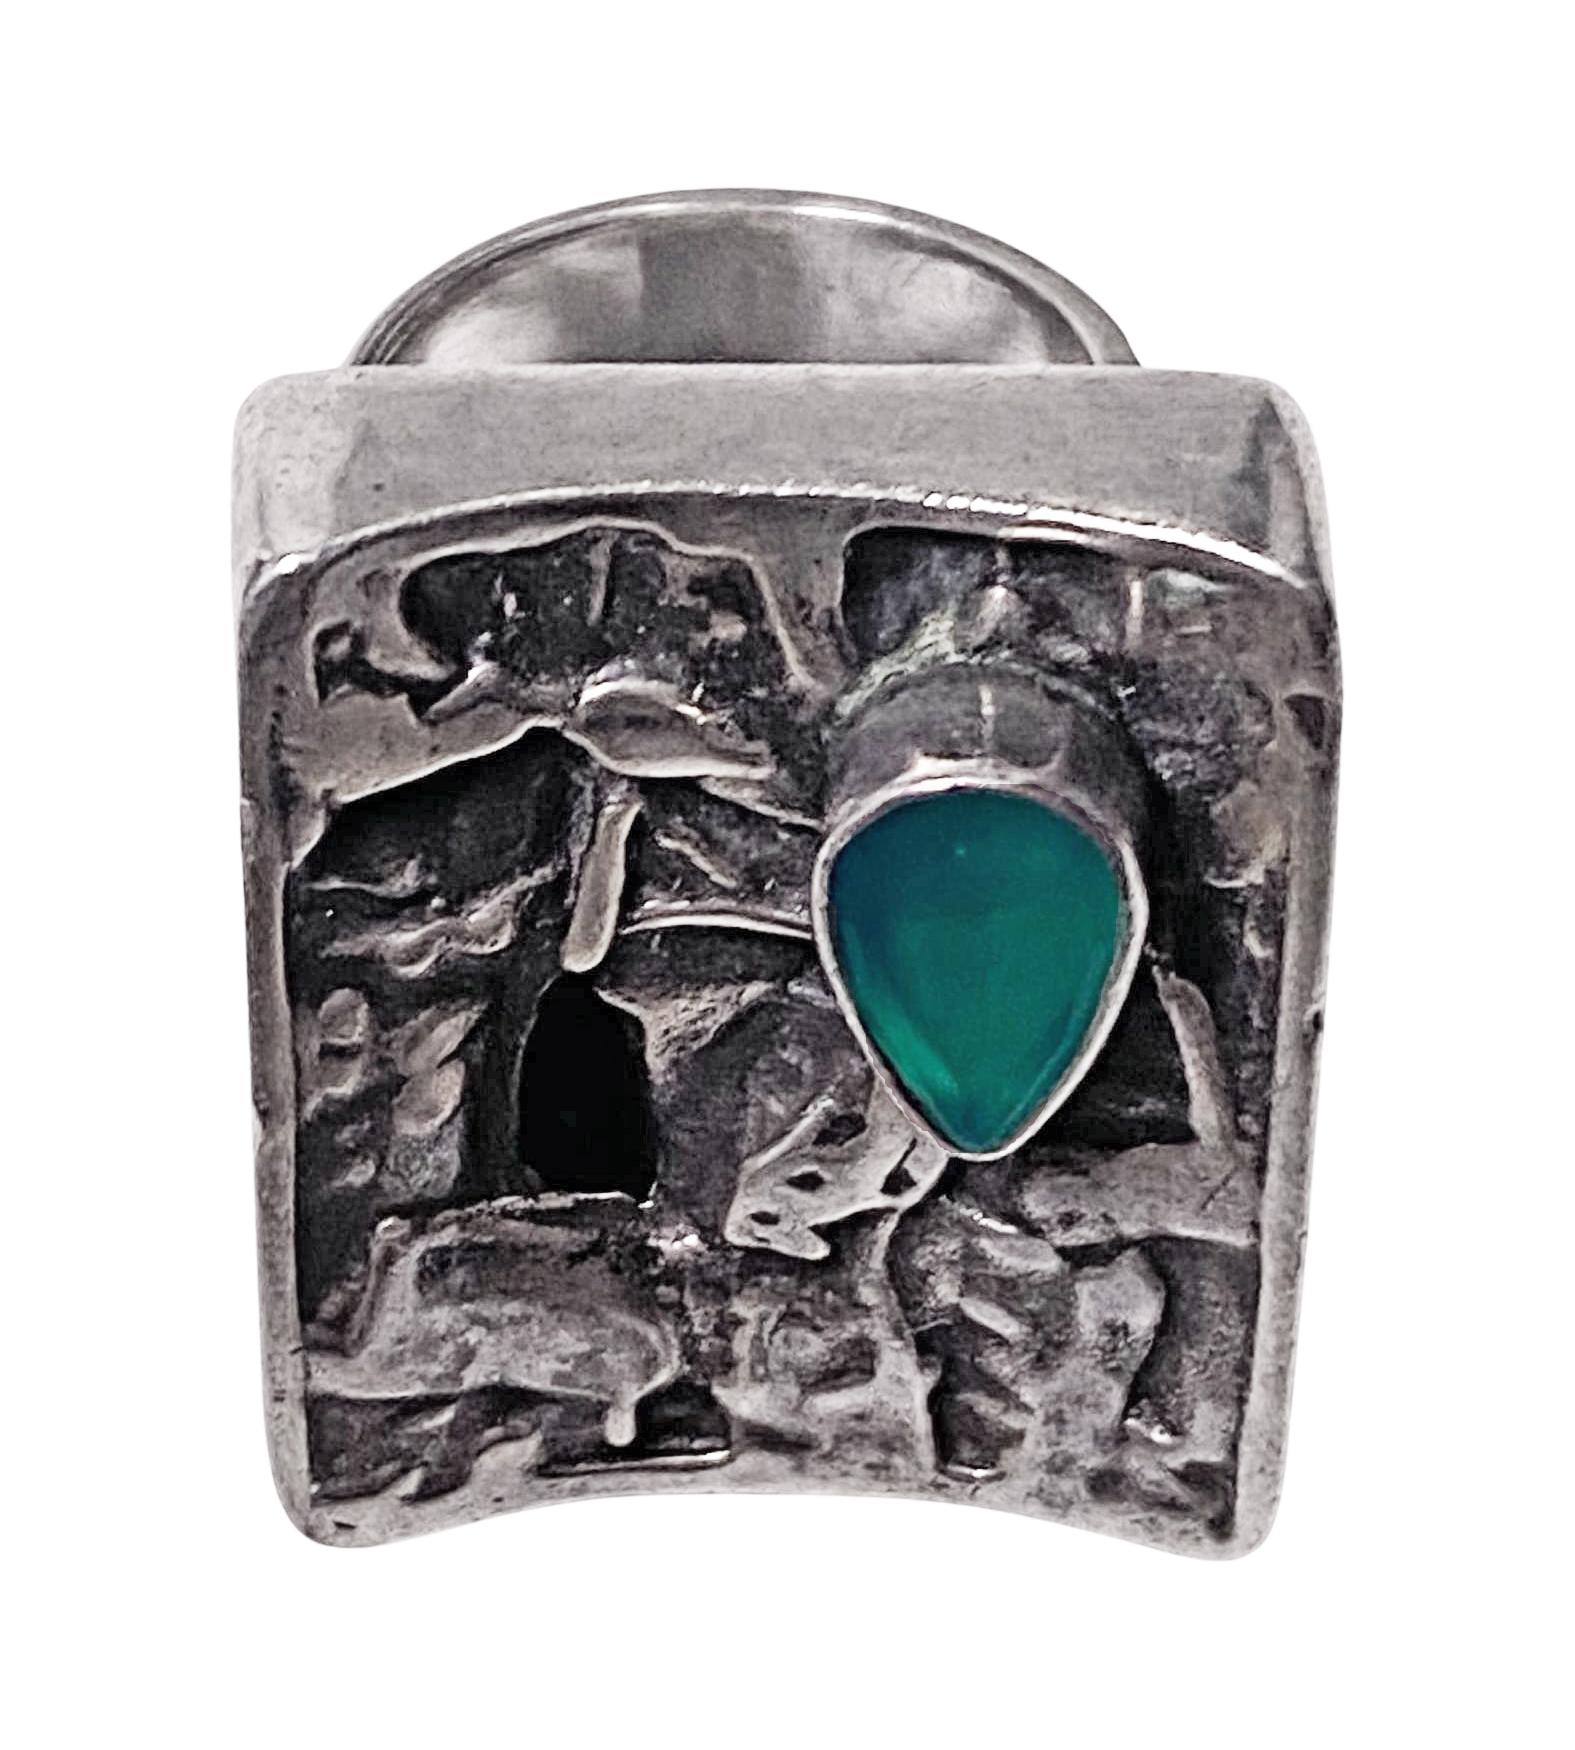 Rachel Gera abstract brutalist Modernist Sterling Ring, Israel, C.1975. Rectangular oxidised and high points polished abstract form accented with bezel set pear facetted green paste stone. Signed on underside Gera in English and Hebrew. Rachel Gera,